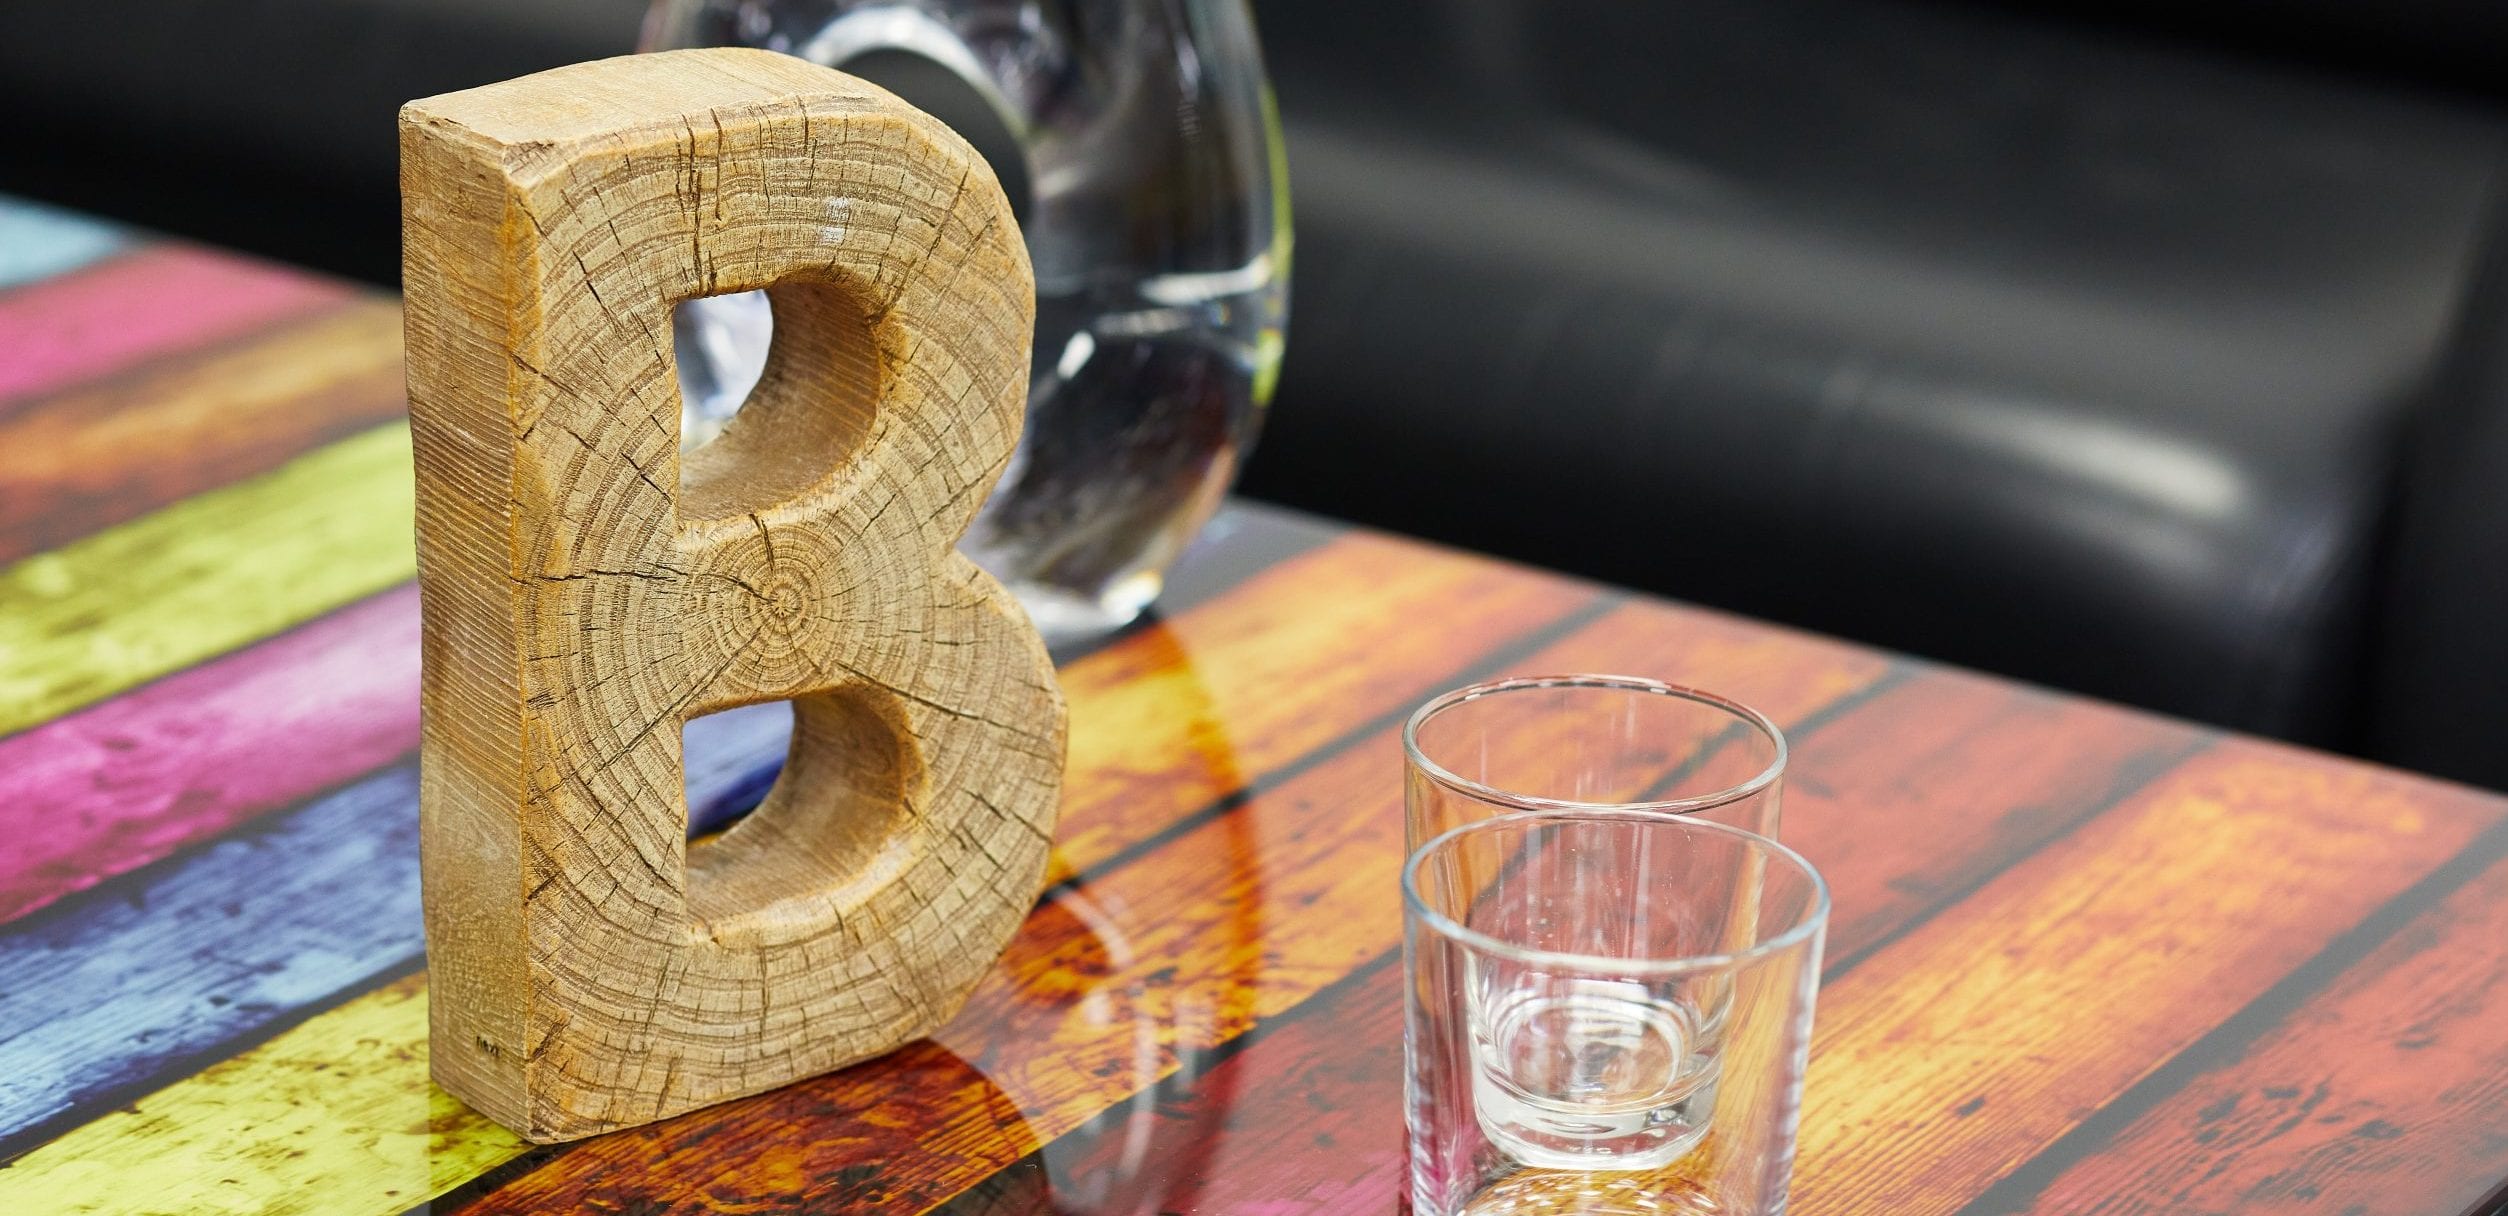 Wooden B on table